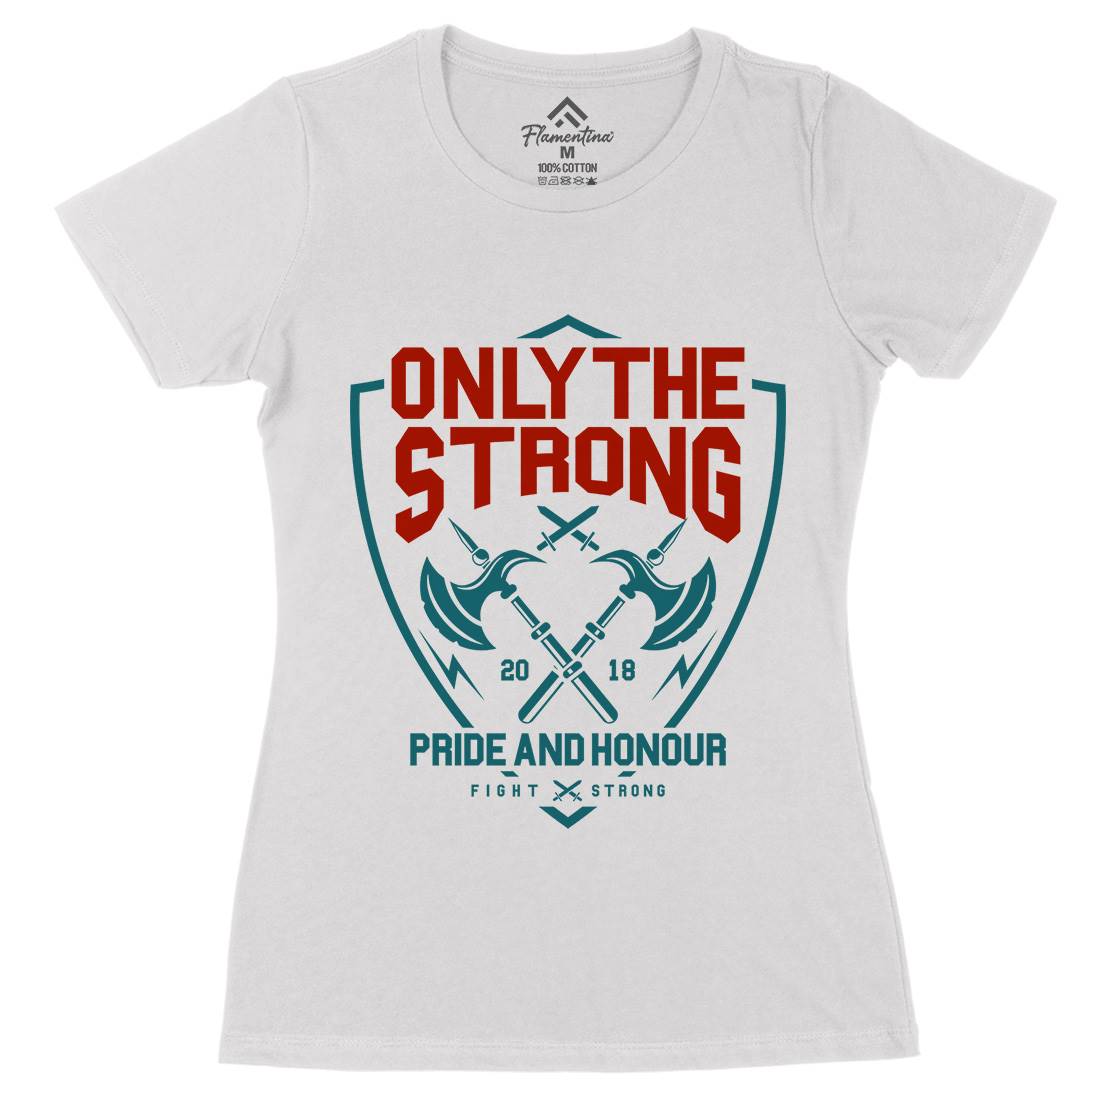 Only The Strong Womens Organic Crew Neck T-Shirt Quotes A257